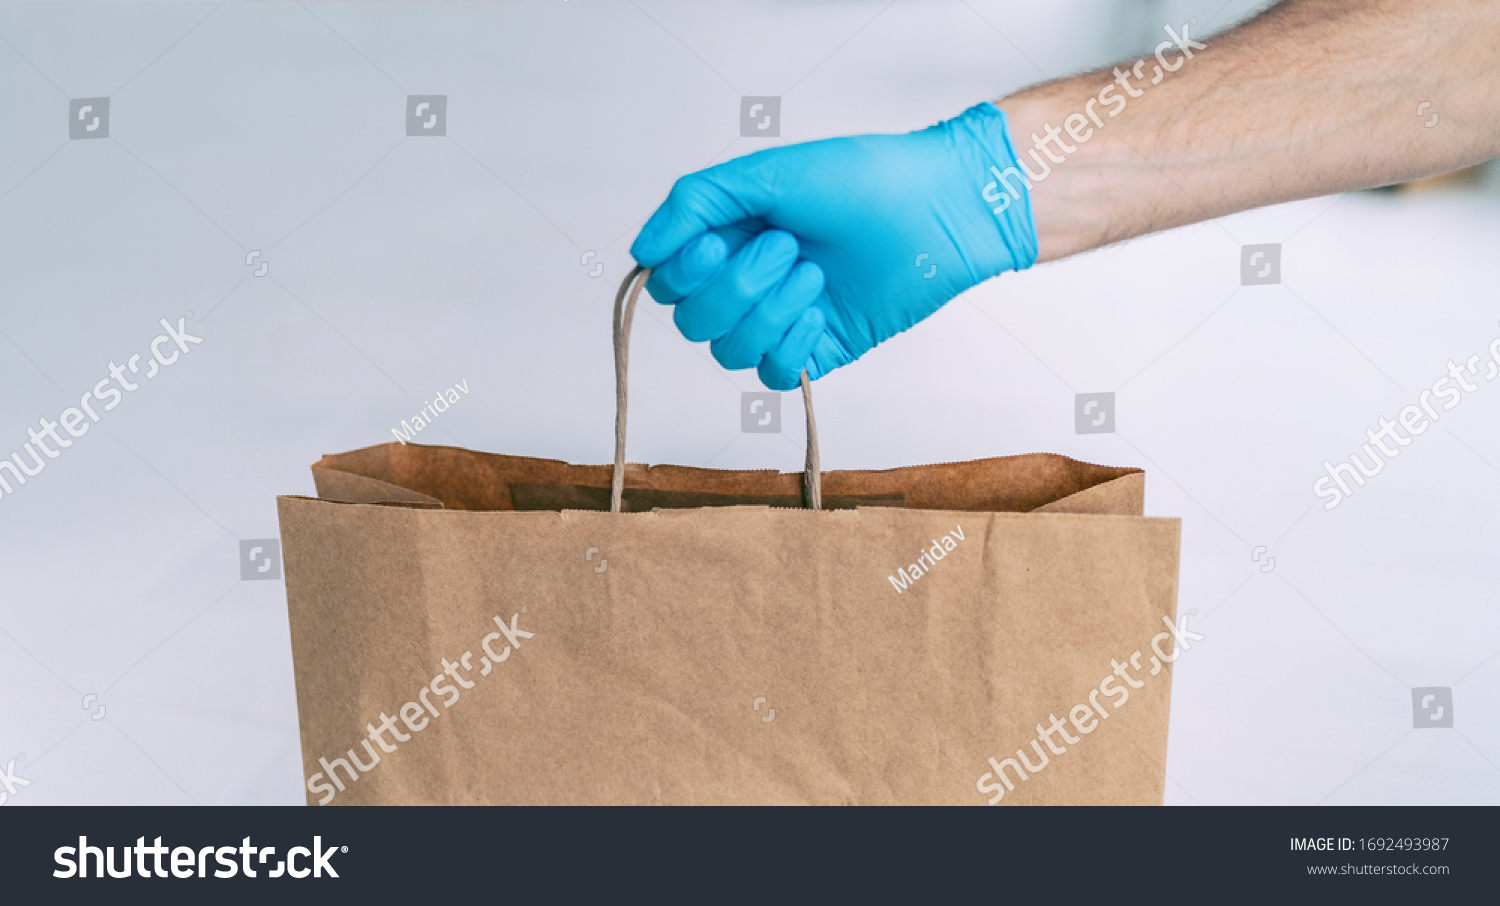 Grocery store shopping delivery man giving paper bag wearing blue glove as protection for COVID-19 Coronavirus precautions. #1692493987